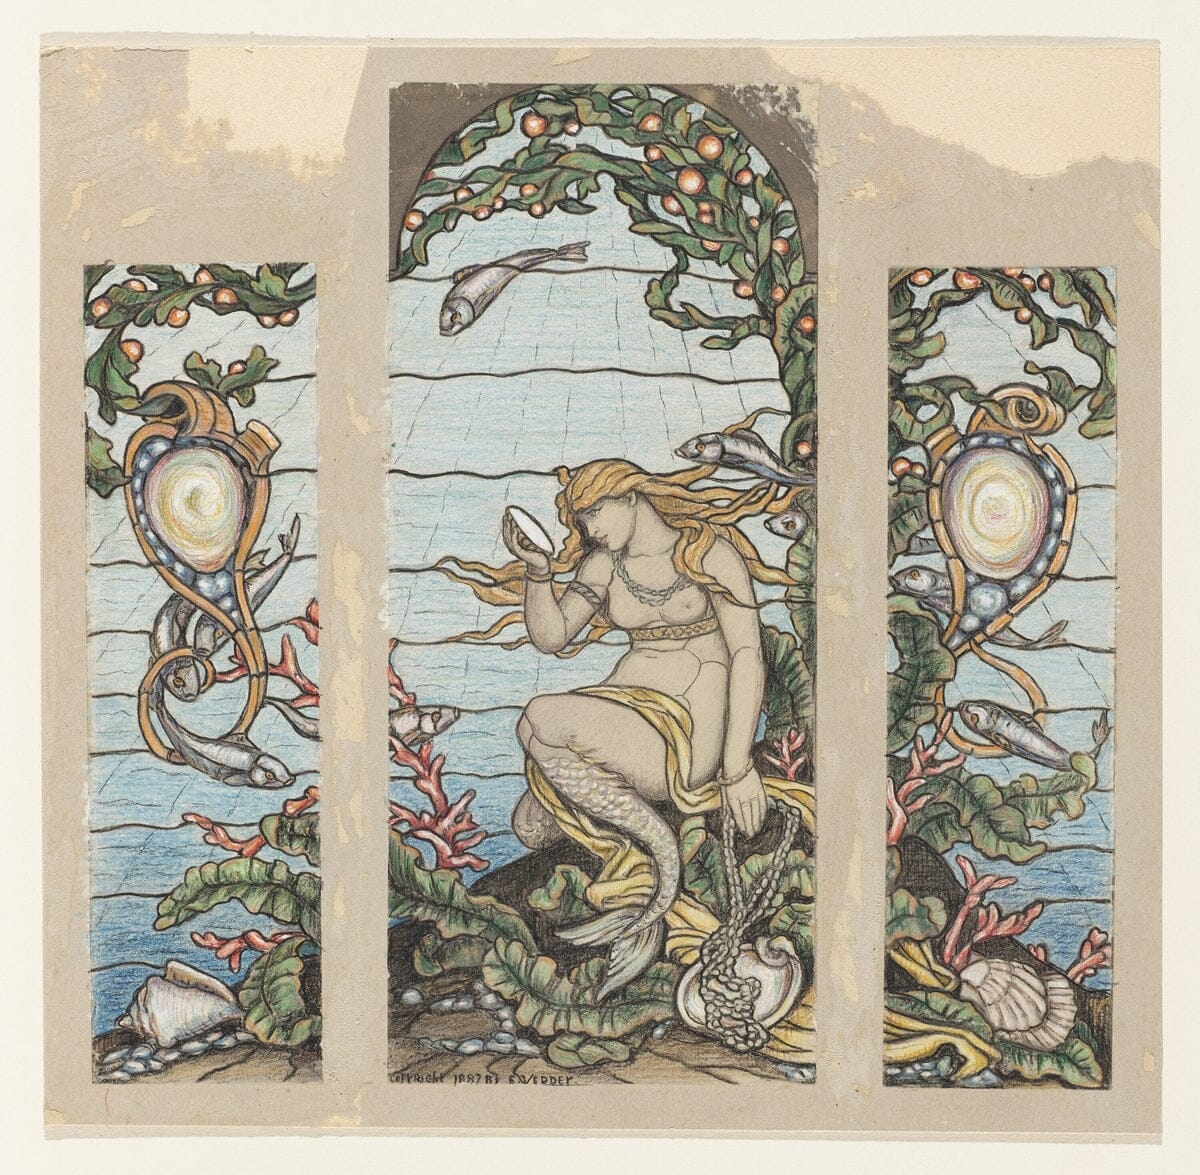 Stained glass design (1800s)  | Tiffany & Co artwork Posters, Prints, & Visual Artwork The Trumpet Shop   